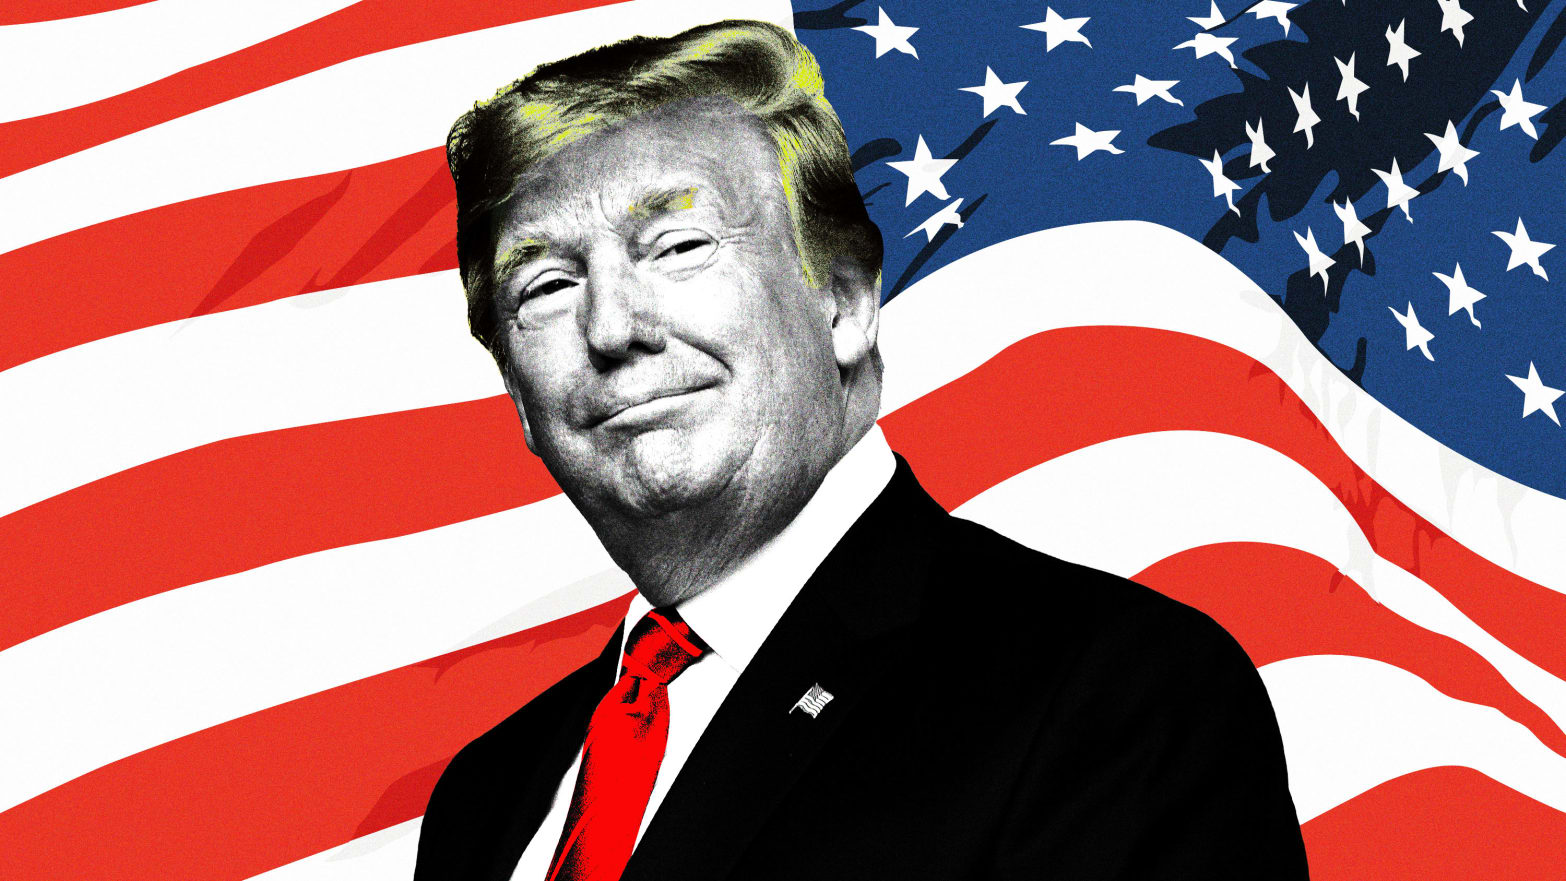 An illustration that includes a photo of Former United States President Donald Trump and the American Flag